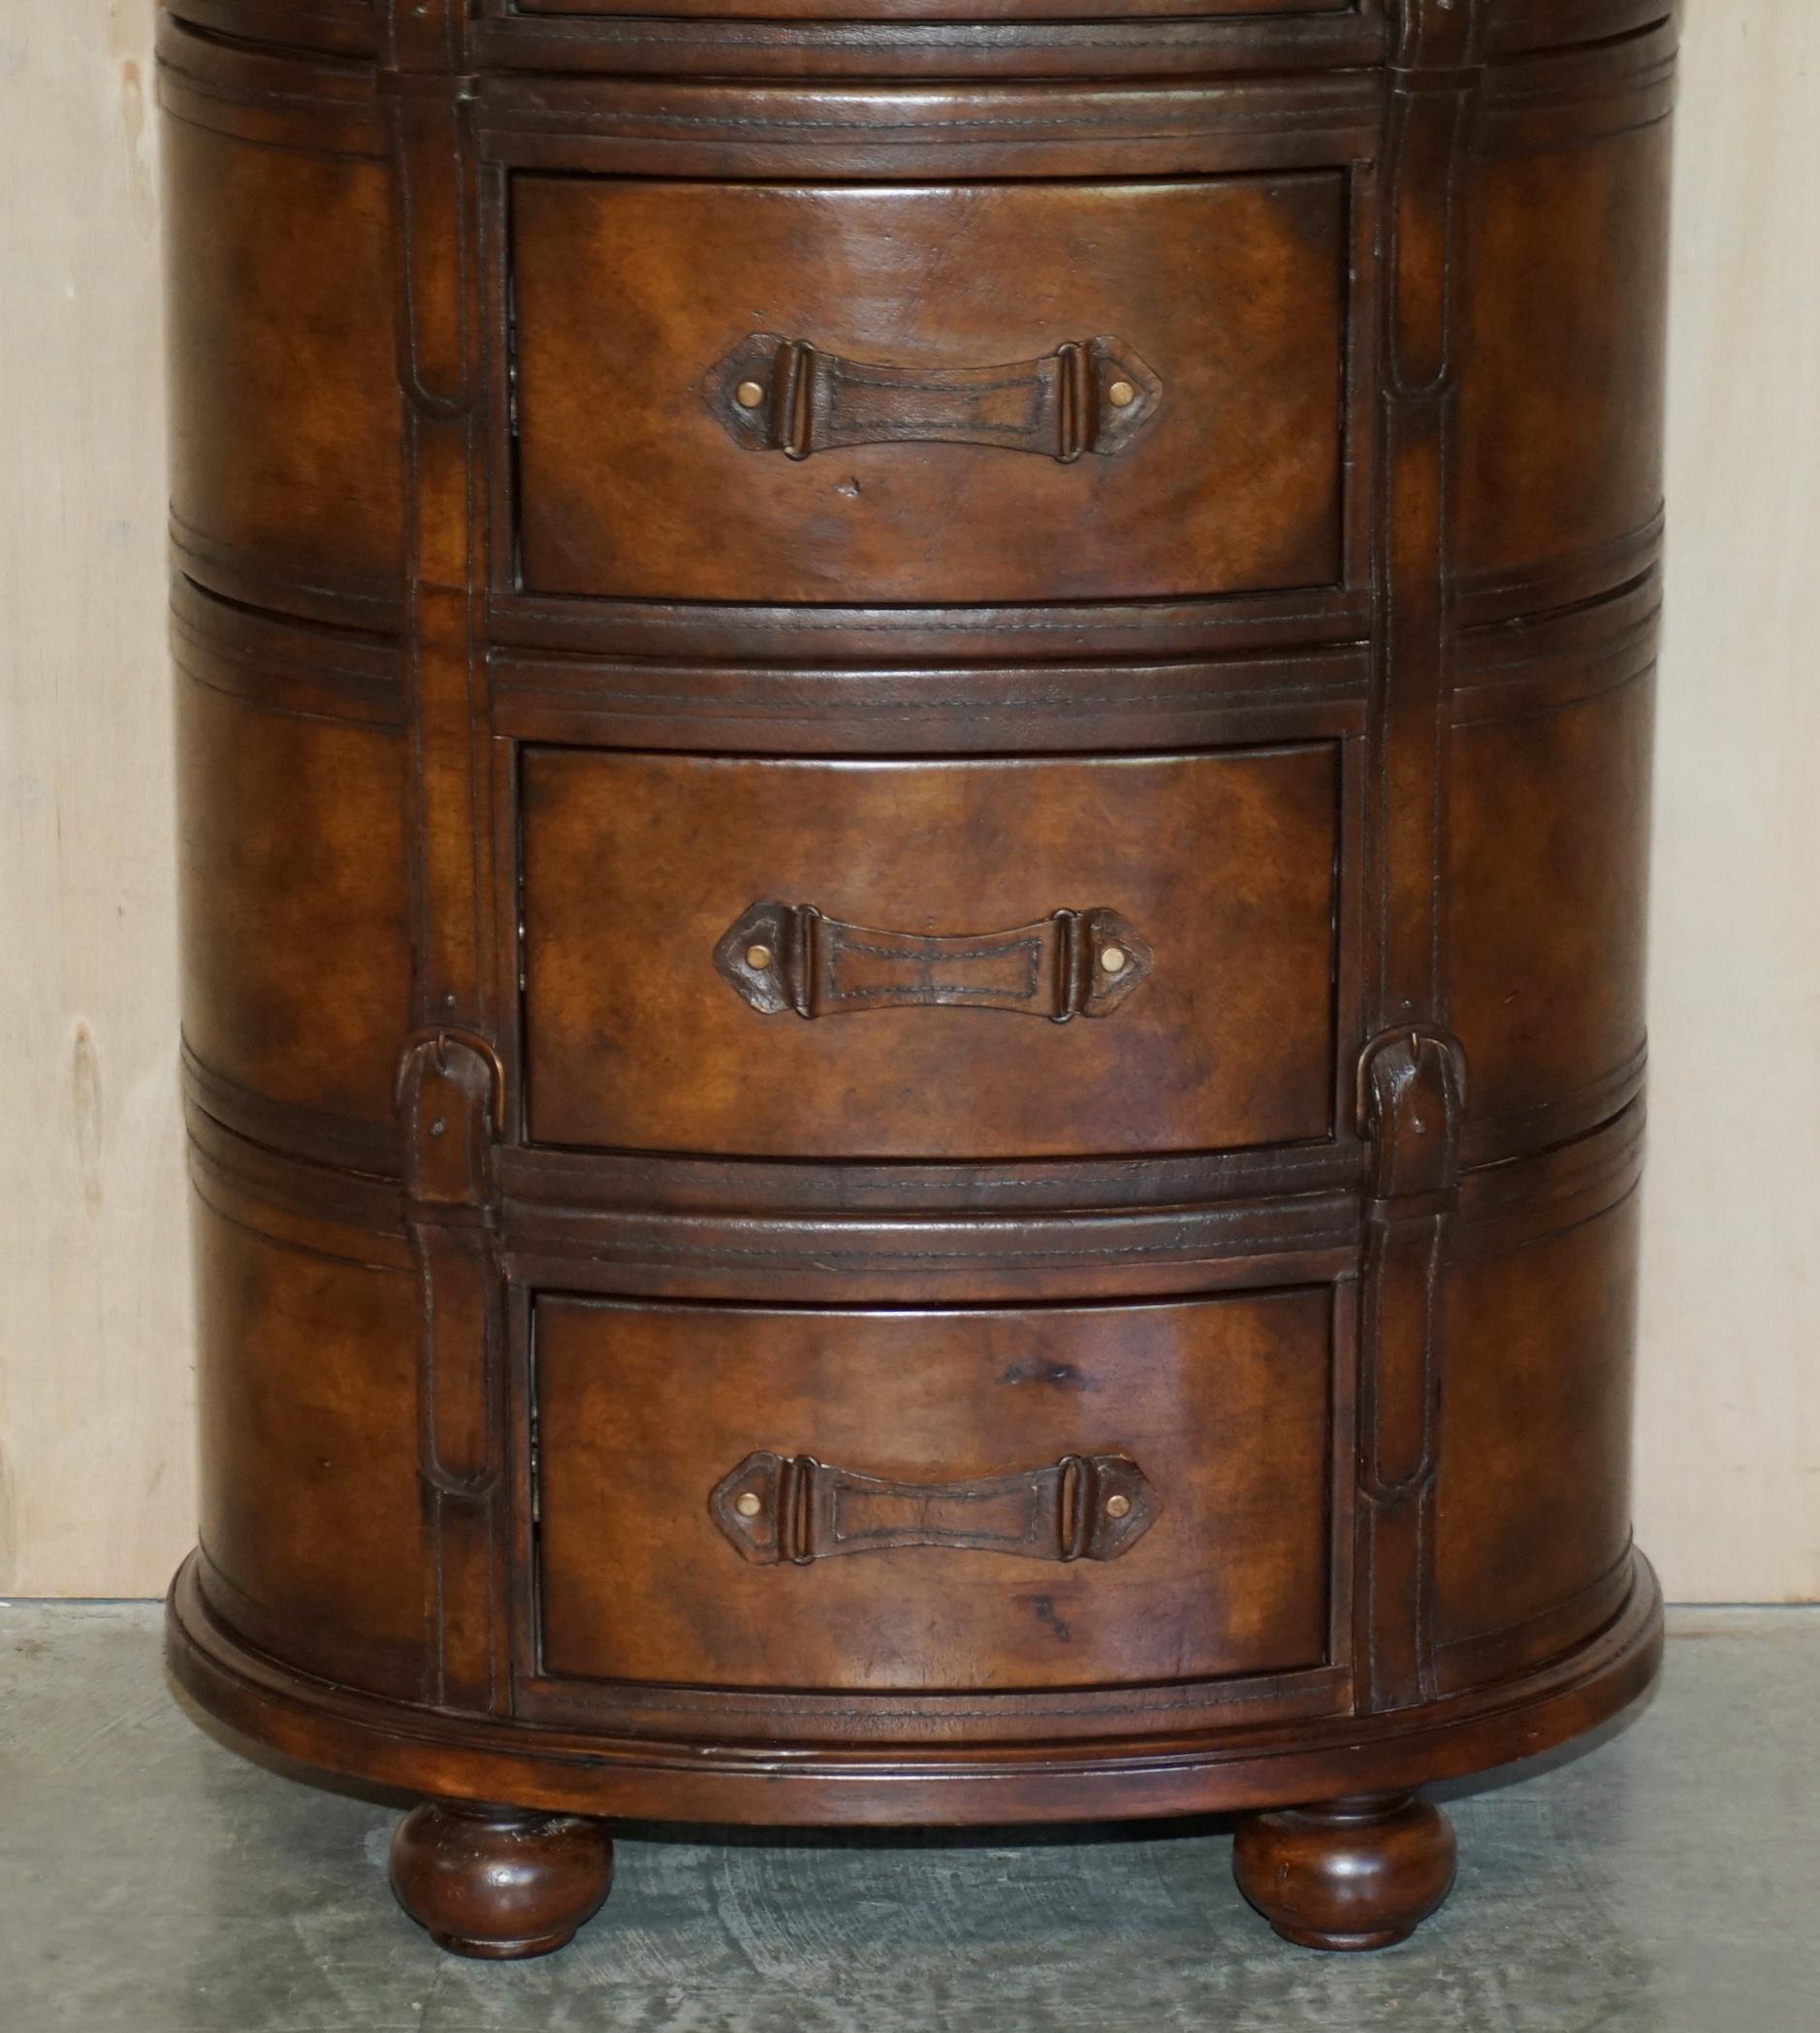 English Brown Leather Oval Tallboy Chest of Drawers with Luggage Style Straps or Belts